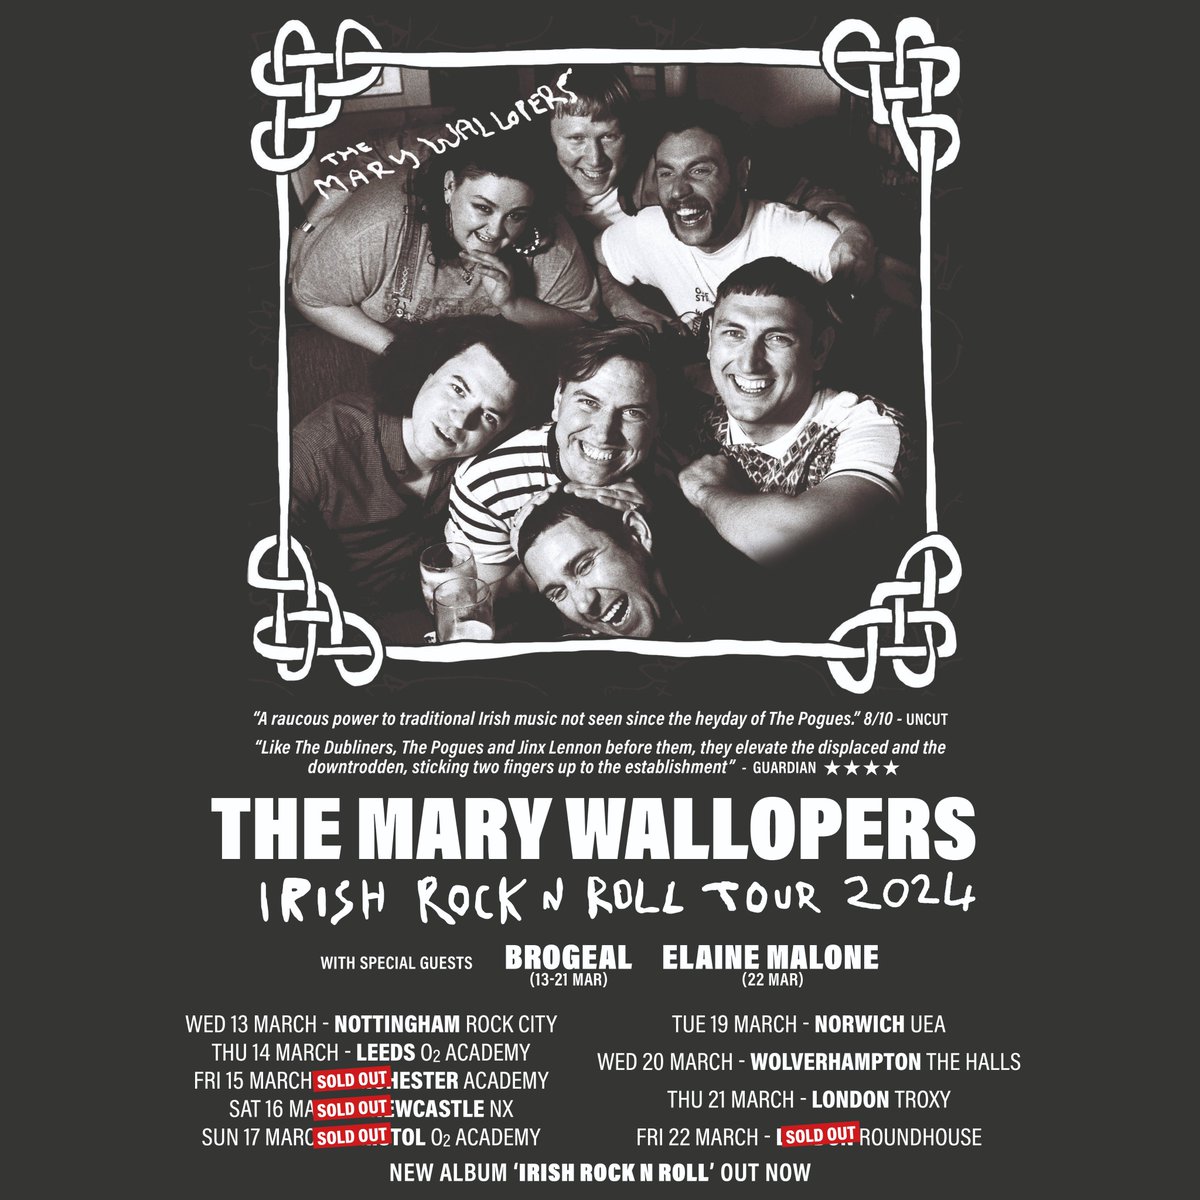 This Thursday we've got the energetic @marywallopers in for an unmissable night! 💃🕺 Plus, they'll be supported by @brogealband, who will get the party started early. Final tickets: link.dice.fm/j209a5725f2b #themarywallopers #irishmusic #londongigs #brogealband